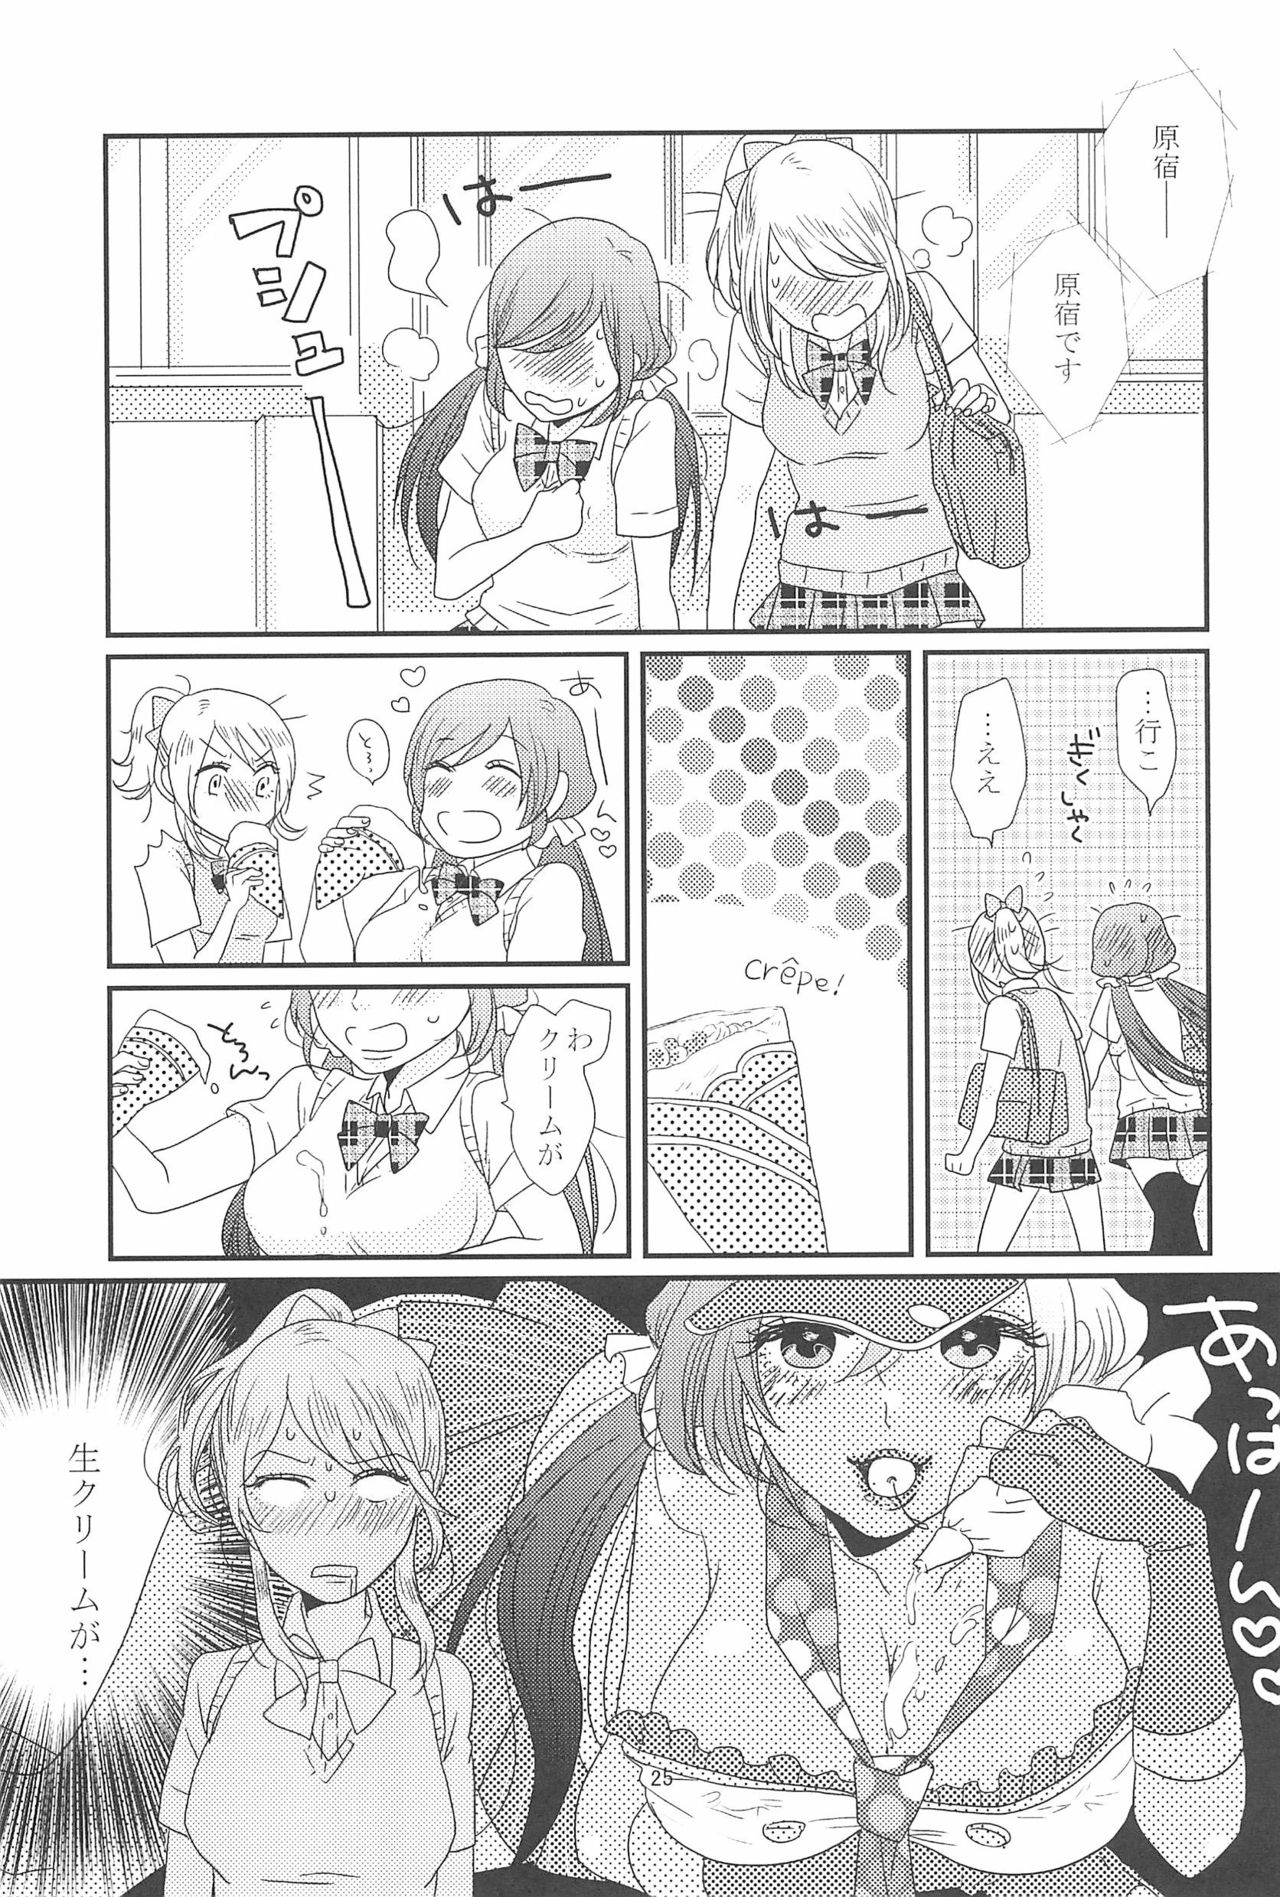 (C90) [BK*N2 (Mikawa Miso)] HAPPY GO LUCKY DAYS (Love Live!) page 29 full